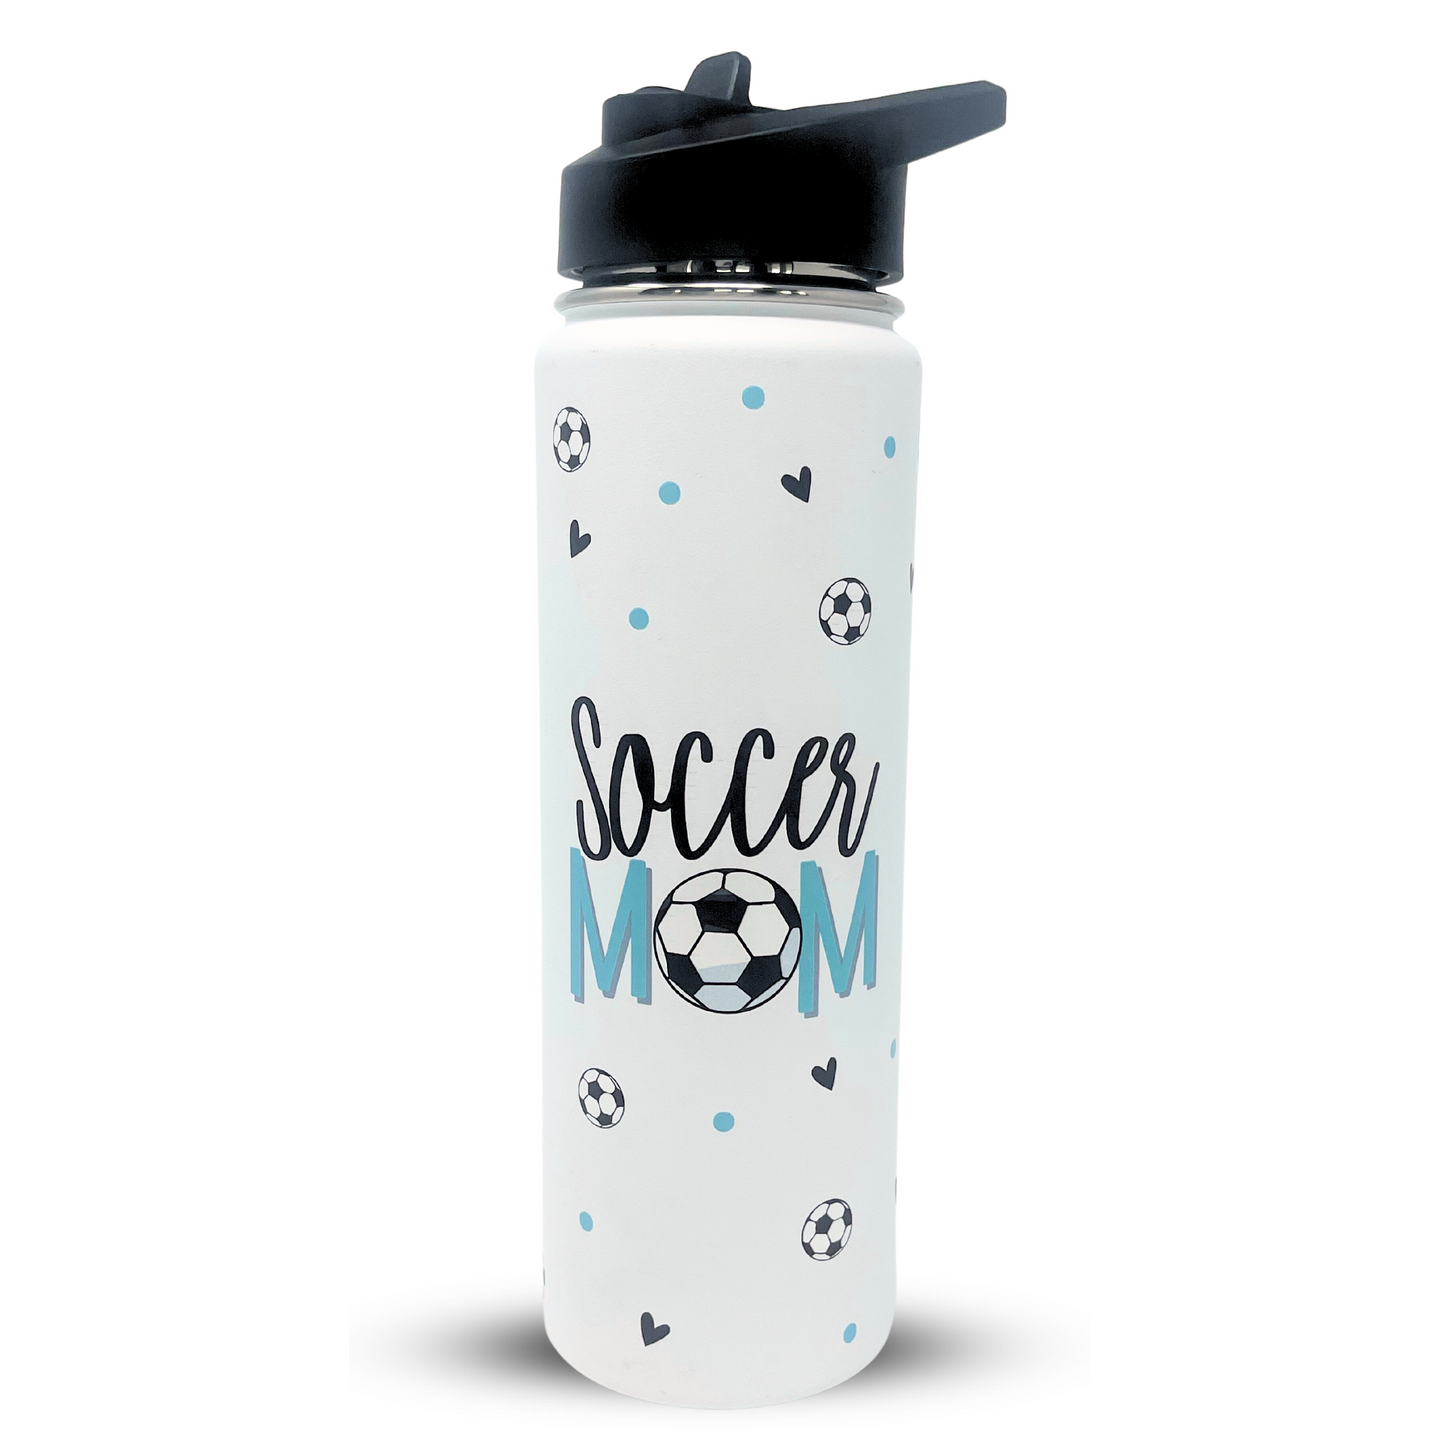 Brooke & Jess Designs Soccer Mom Tumbler Gifts - Large Insulated Water Bottle with Straw - Stainless Steel Metal 24 oz Travel Cup for Mom, Mama, Mother, Wife, Women | Keeps Hot and Cold for Hours